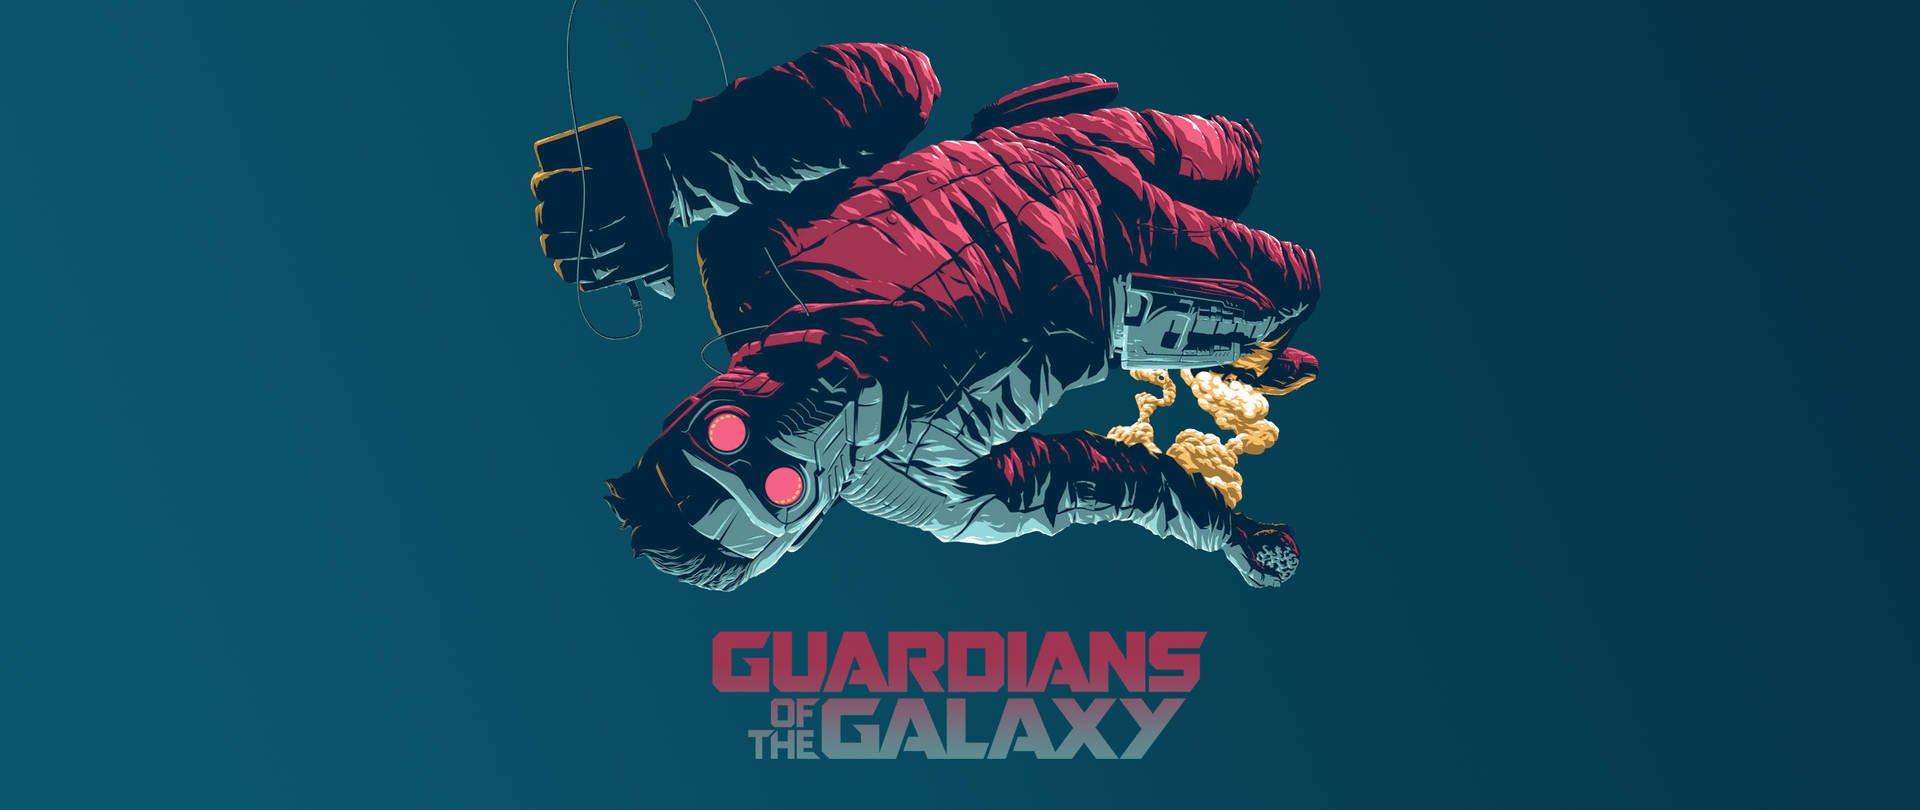 Guardians Of The Galaxy 2023 wallpaper 5k